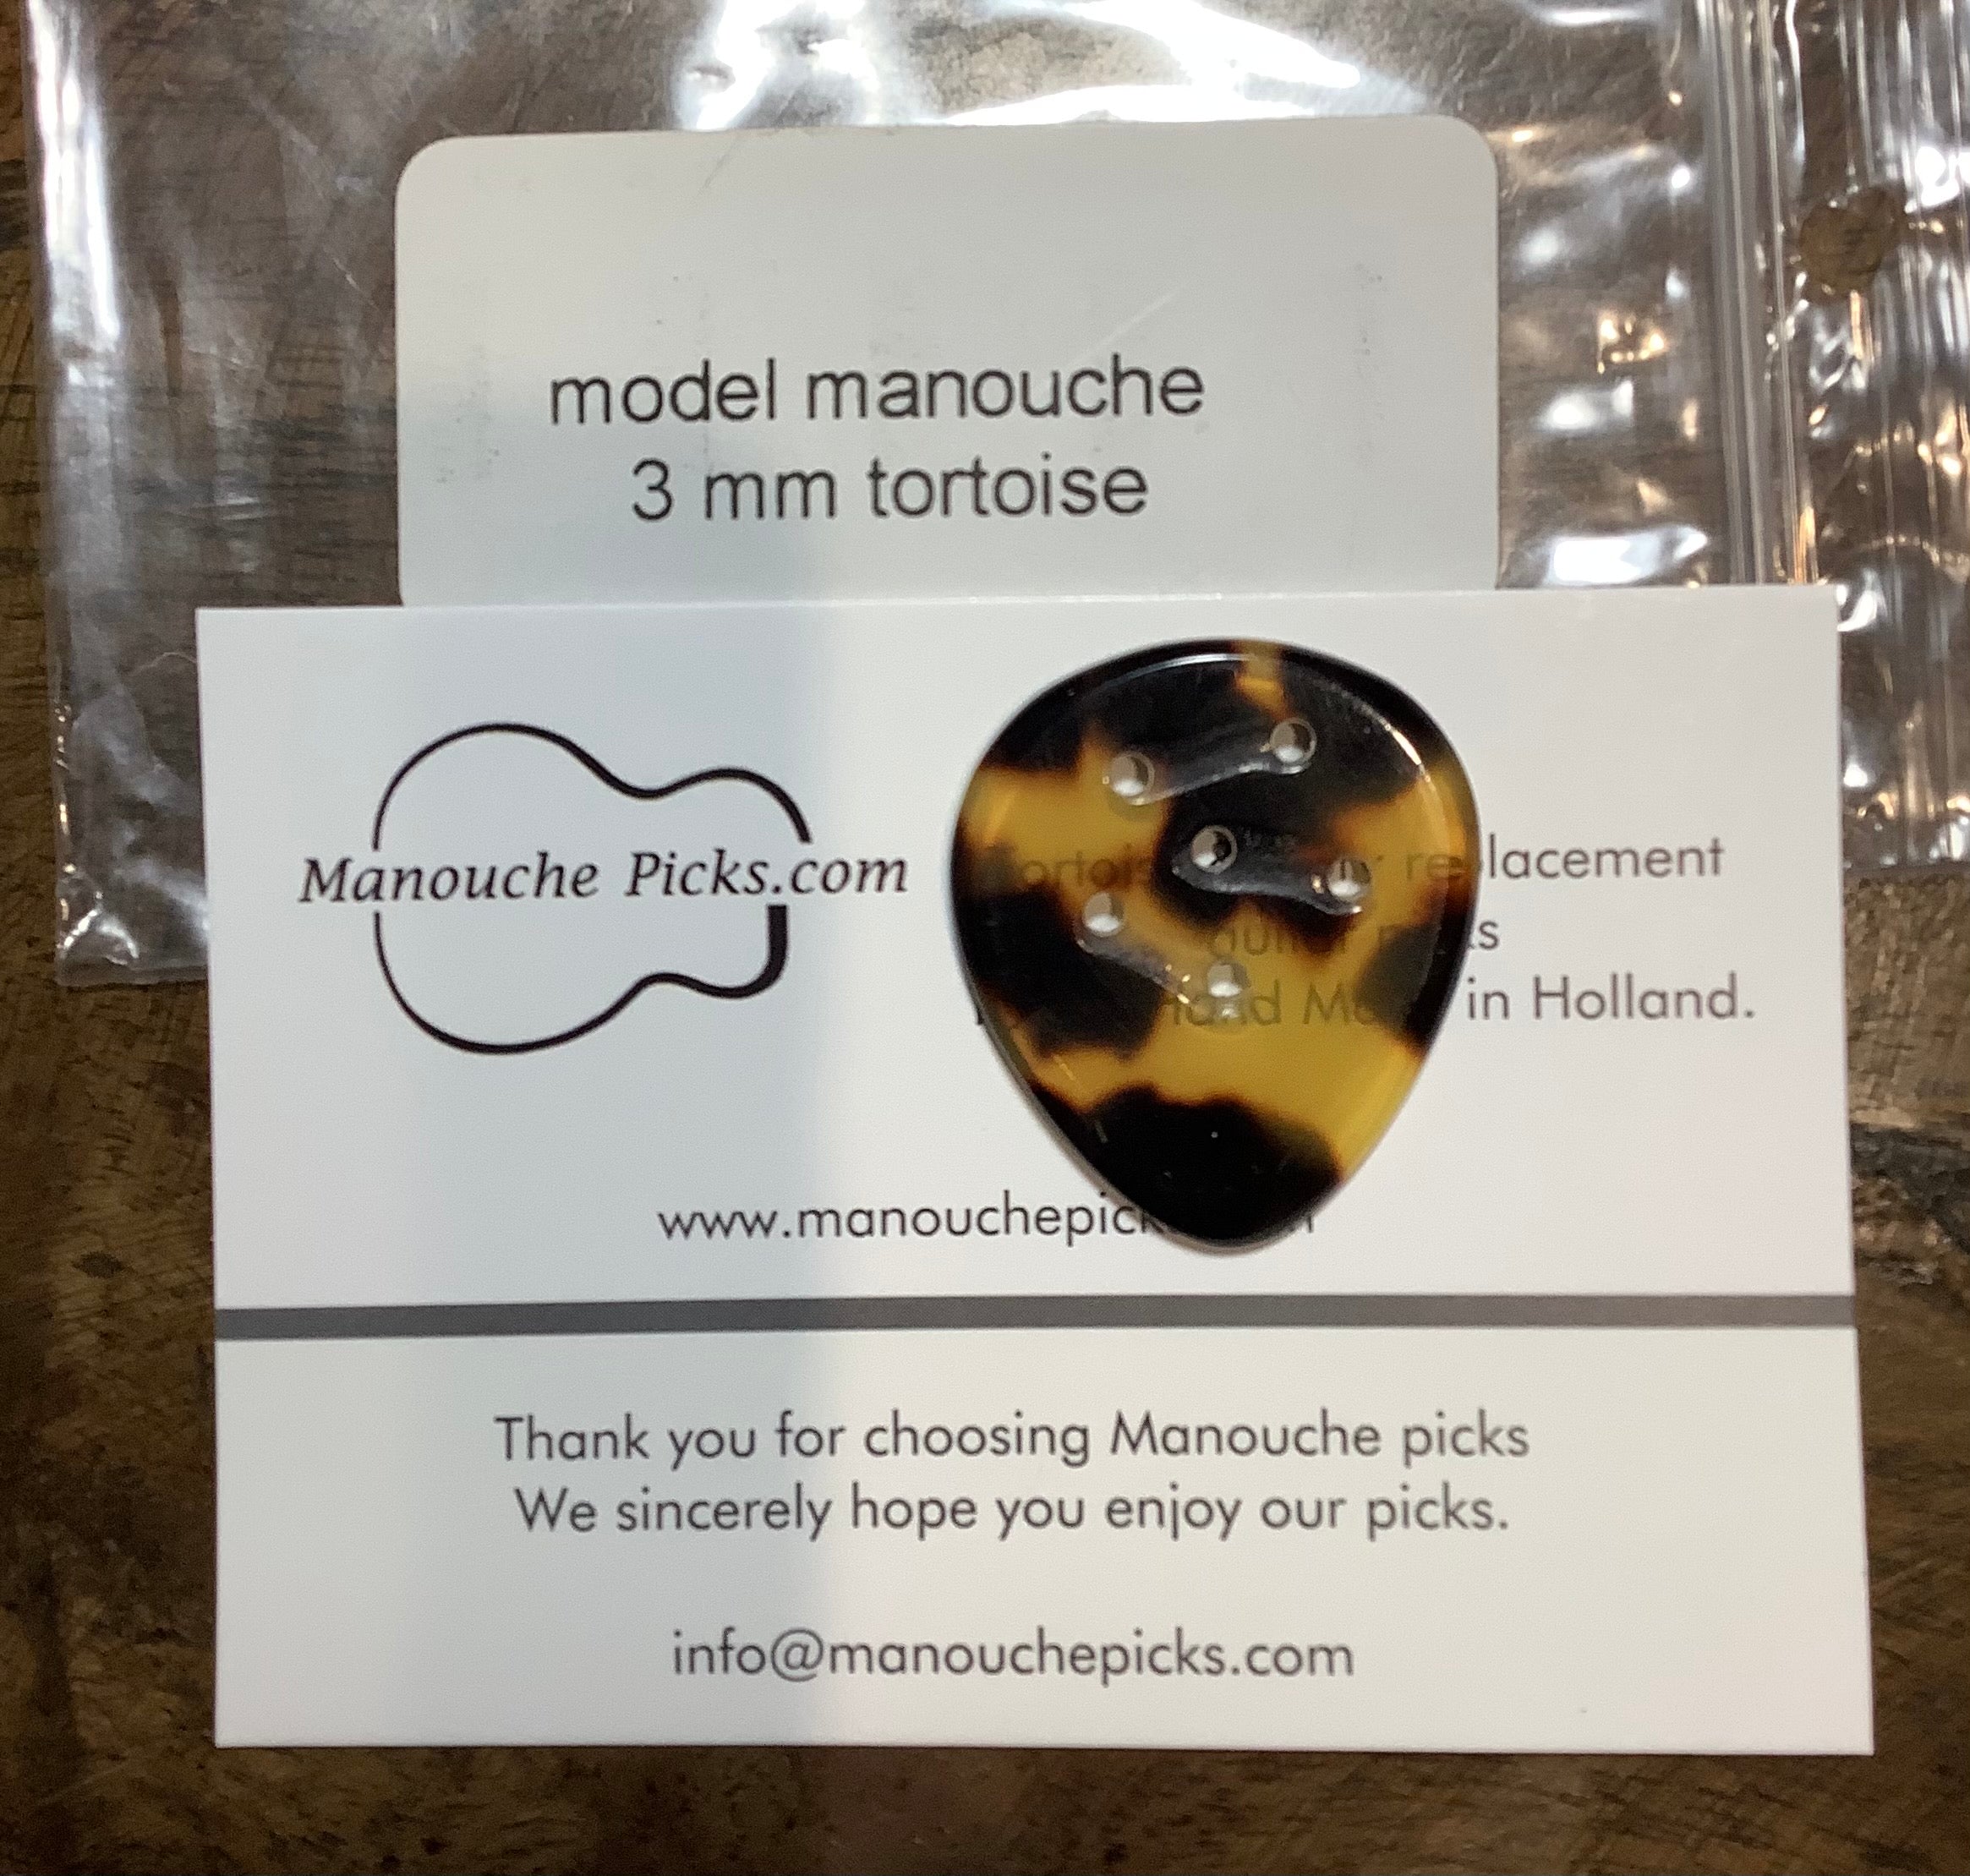 The Manouche Pick - Manouche (This item has free delivery with orders over $55)